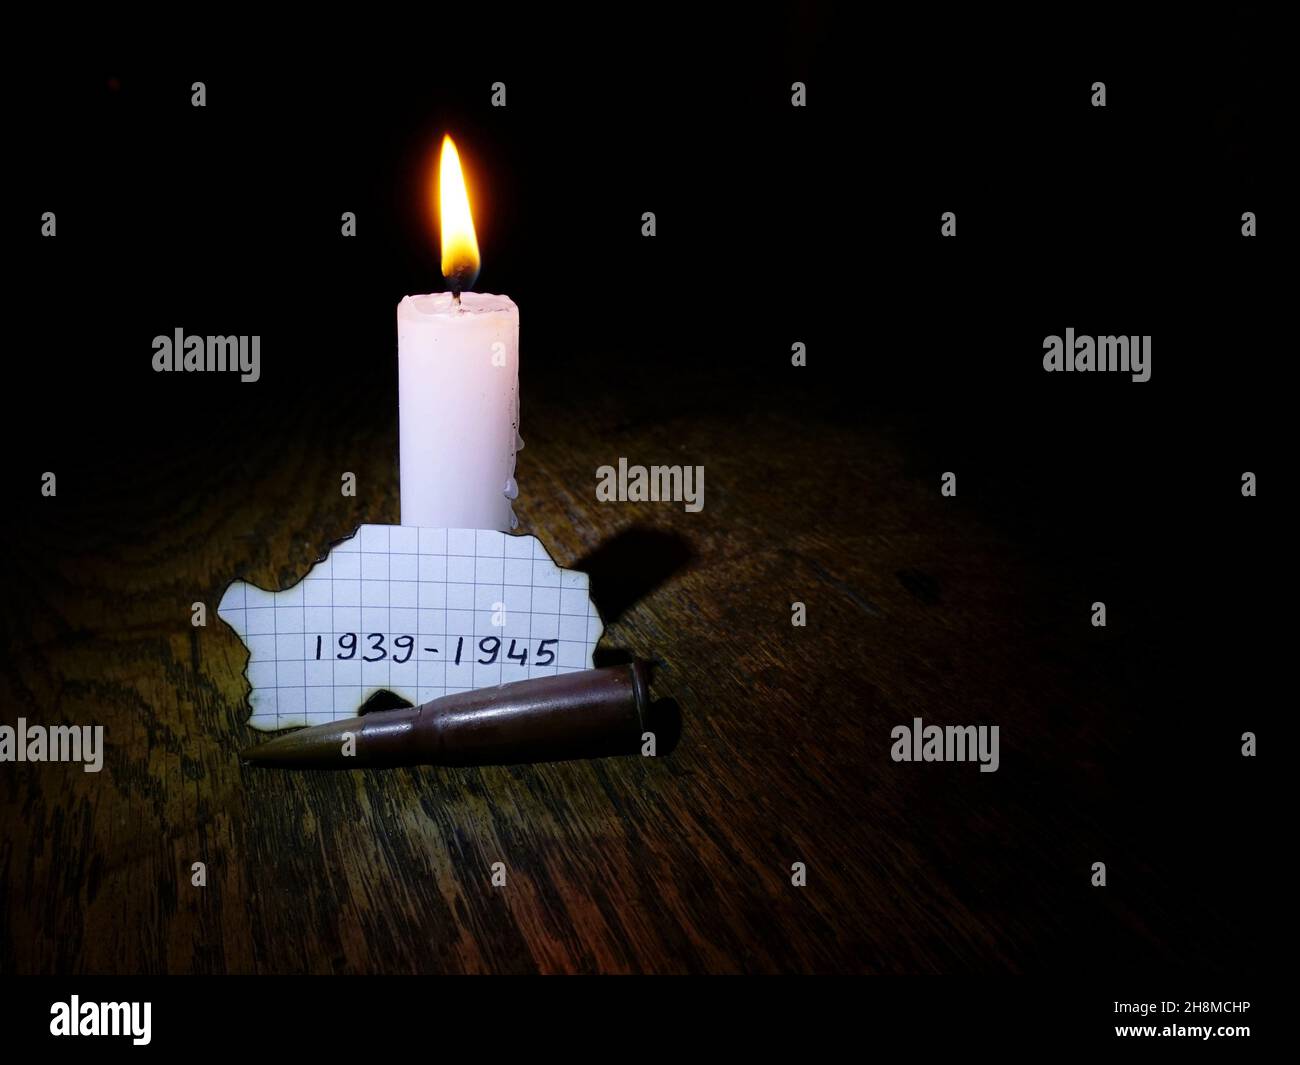 World War II anniversary dates, lit candle and a bullet Stock Photo